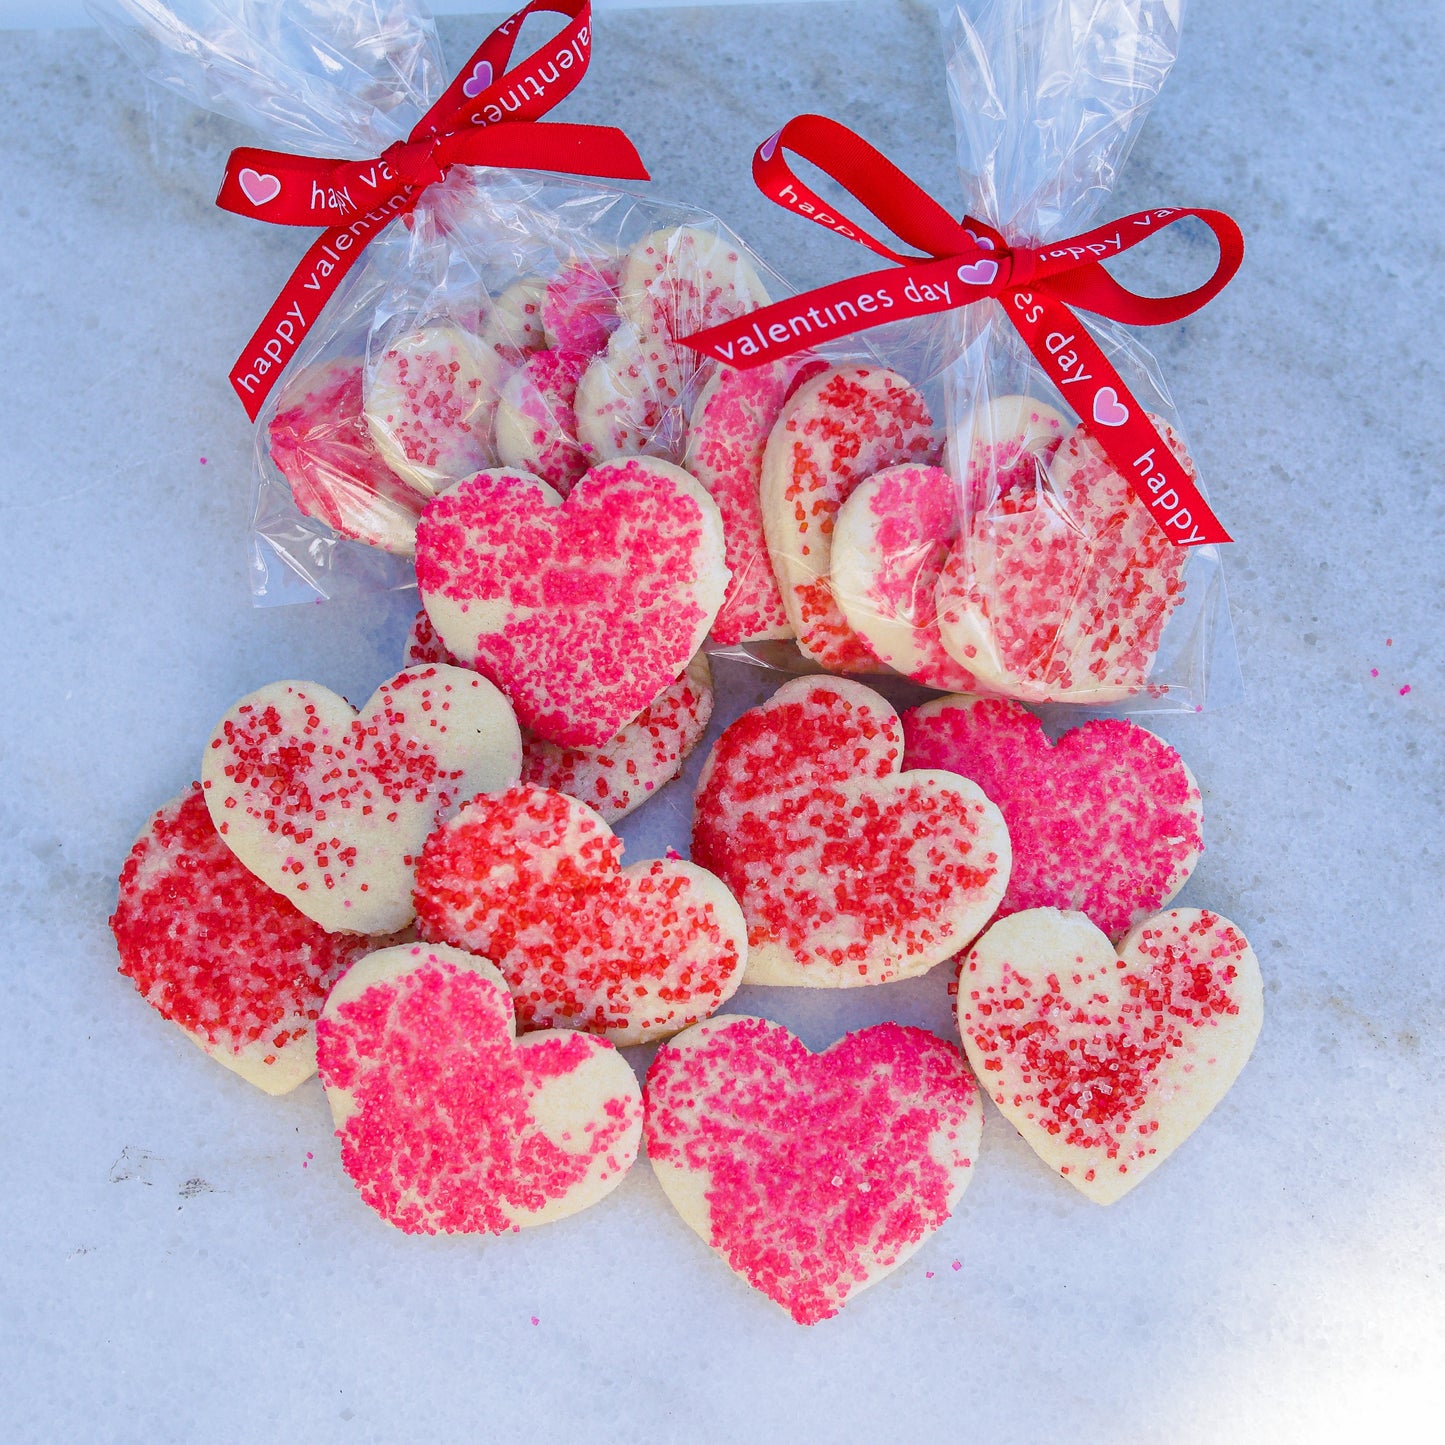 4-piece "Mini Heart" Shortbread Cookies Individually Bagged